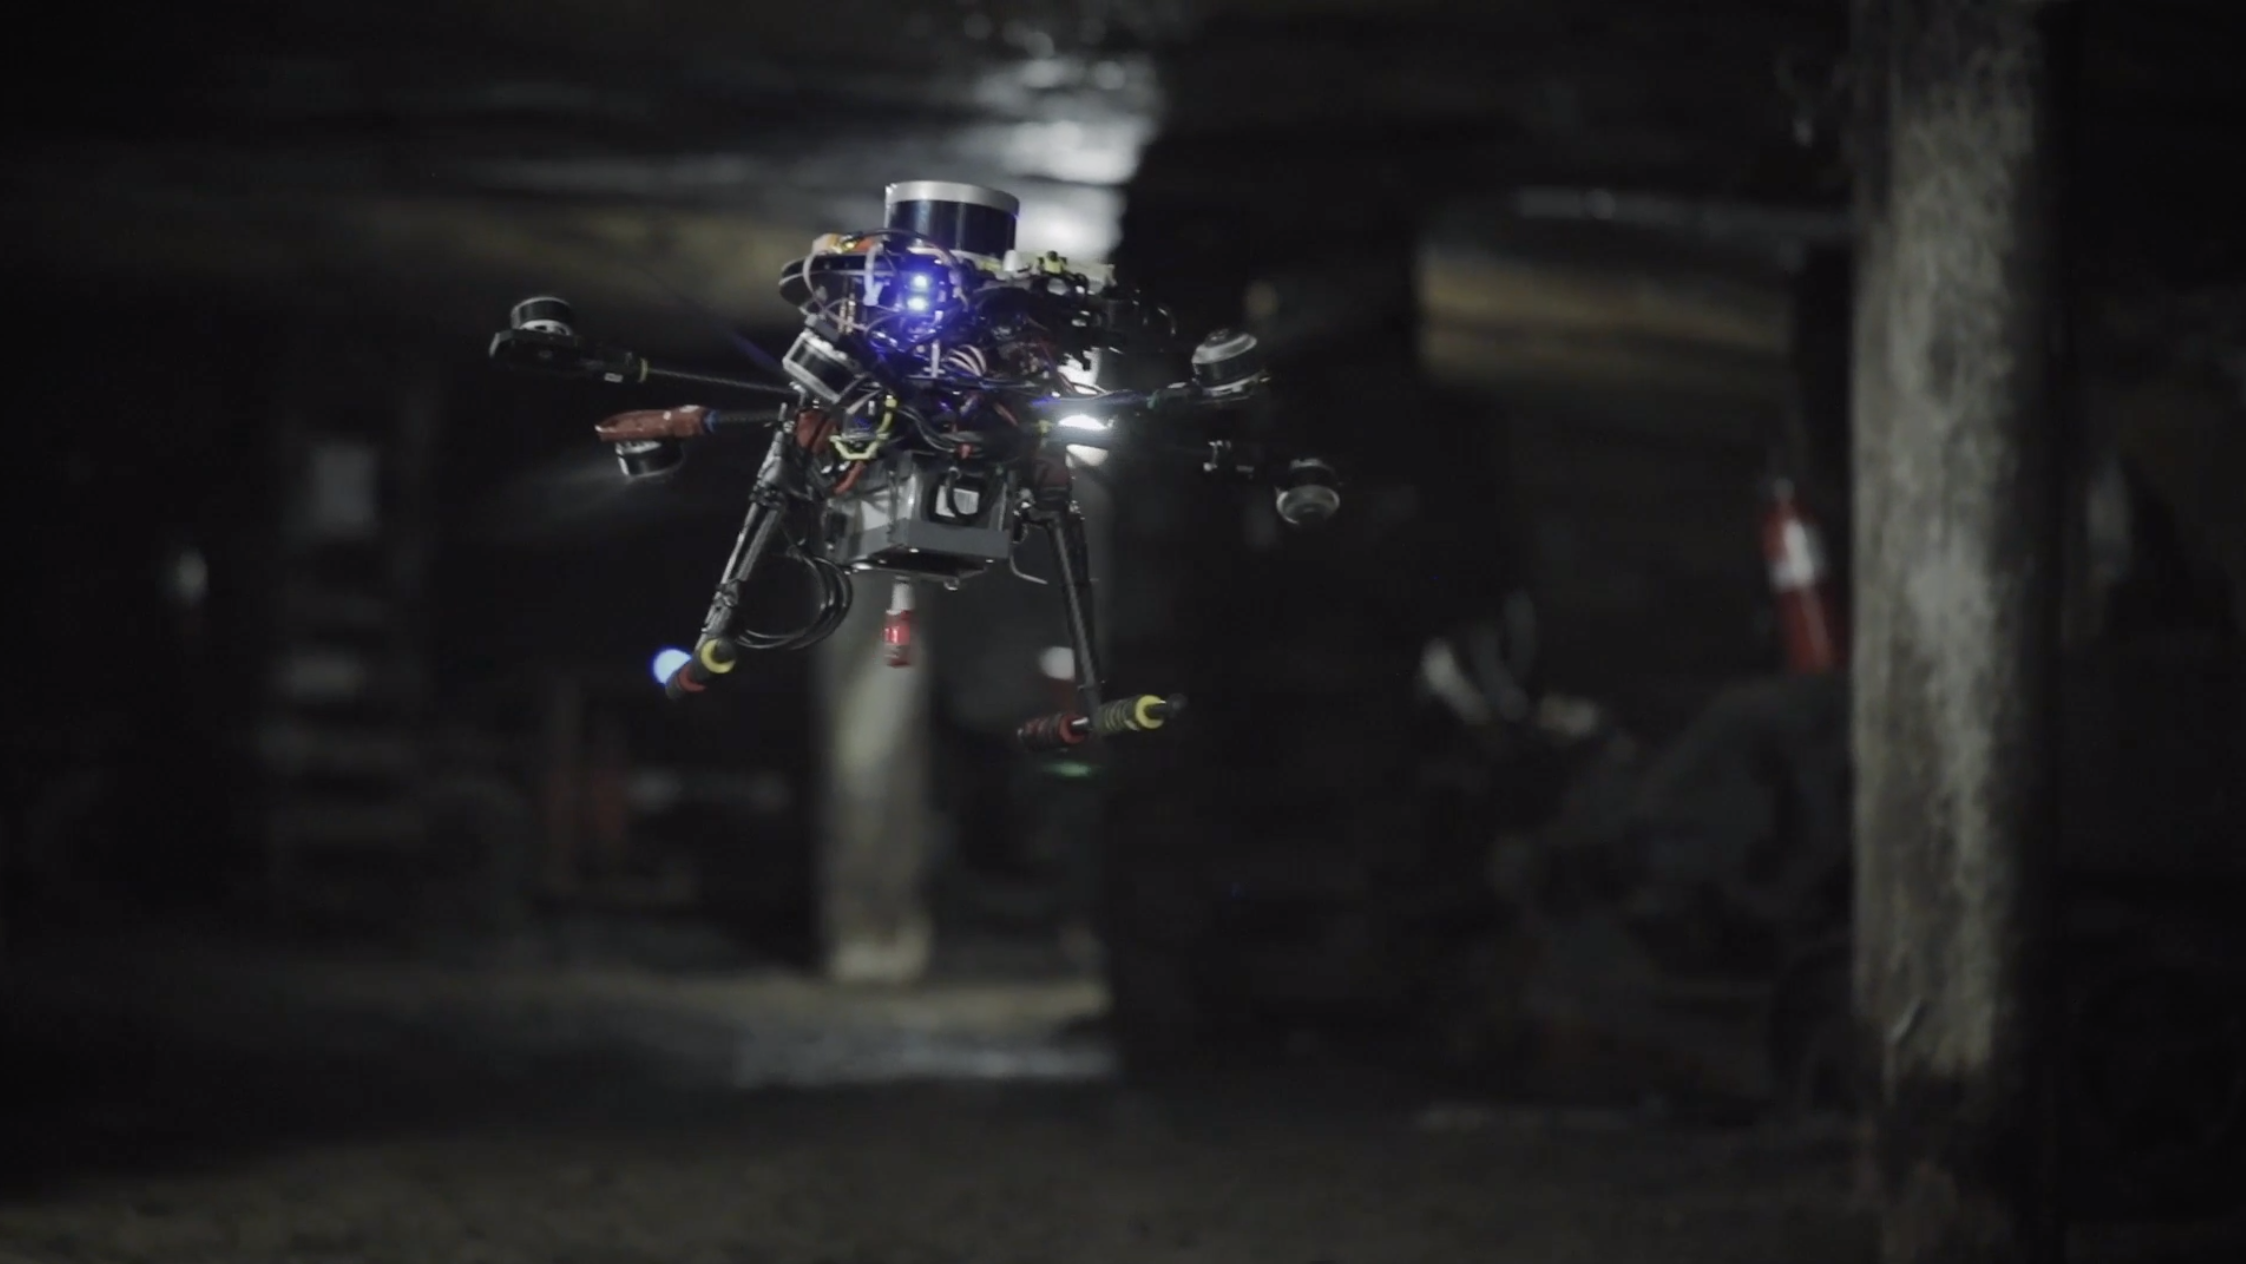 Cmu Team Develops A Robot And Drone System For Mine Rescues Pnu